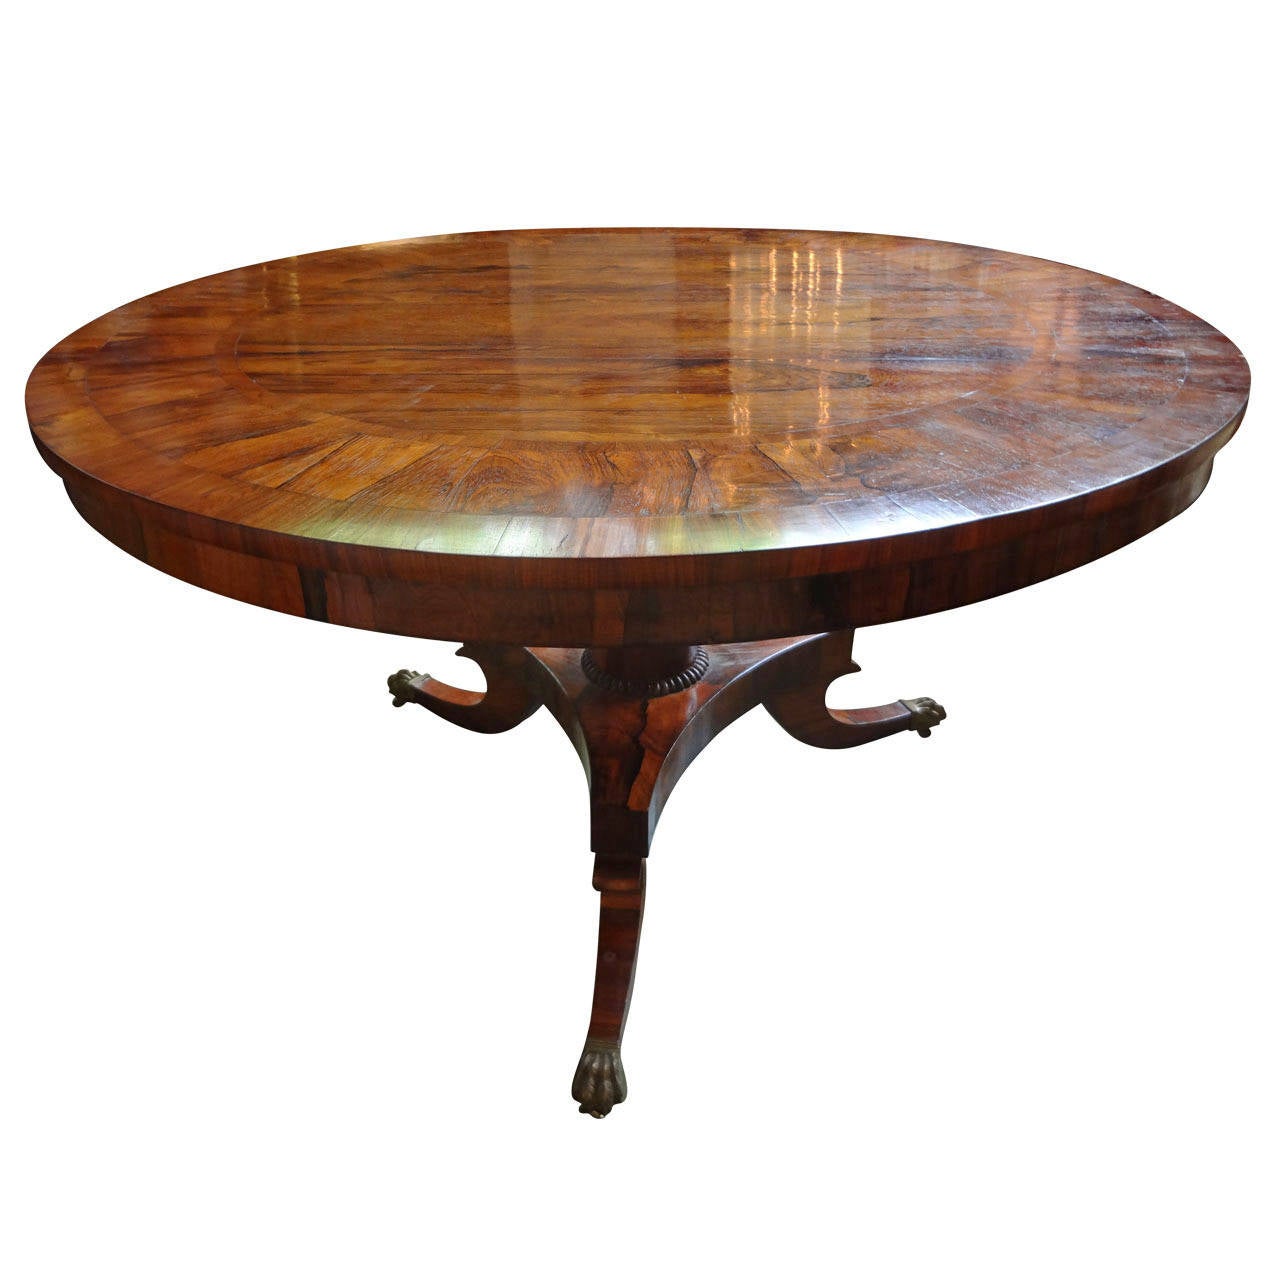 Early 19th century English Regency rosewood tilt-top center pedestal table or dining table with lovely banded detail and bronze mounts, circa 1830.

Please click KIRBY ANTIQUES logo below to view additional pieces from our vast inventory.

 